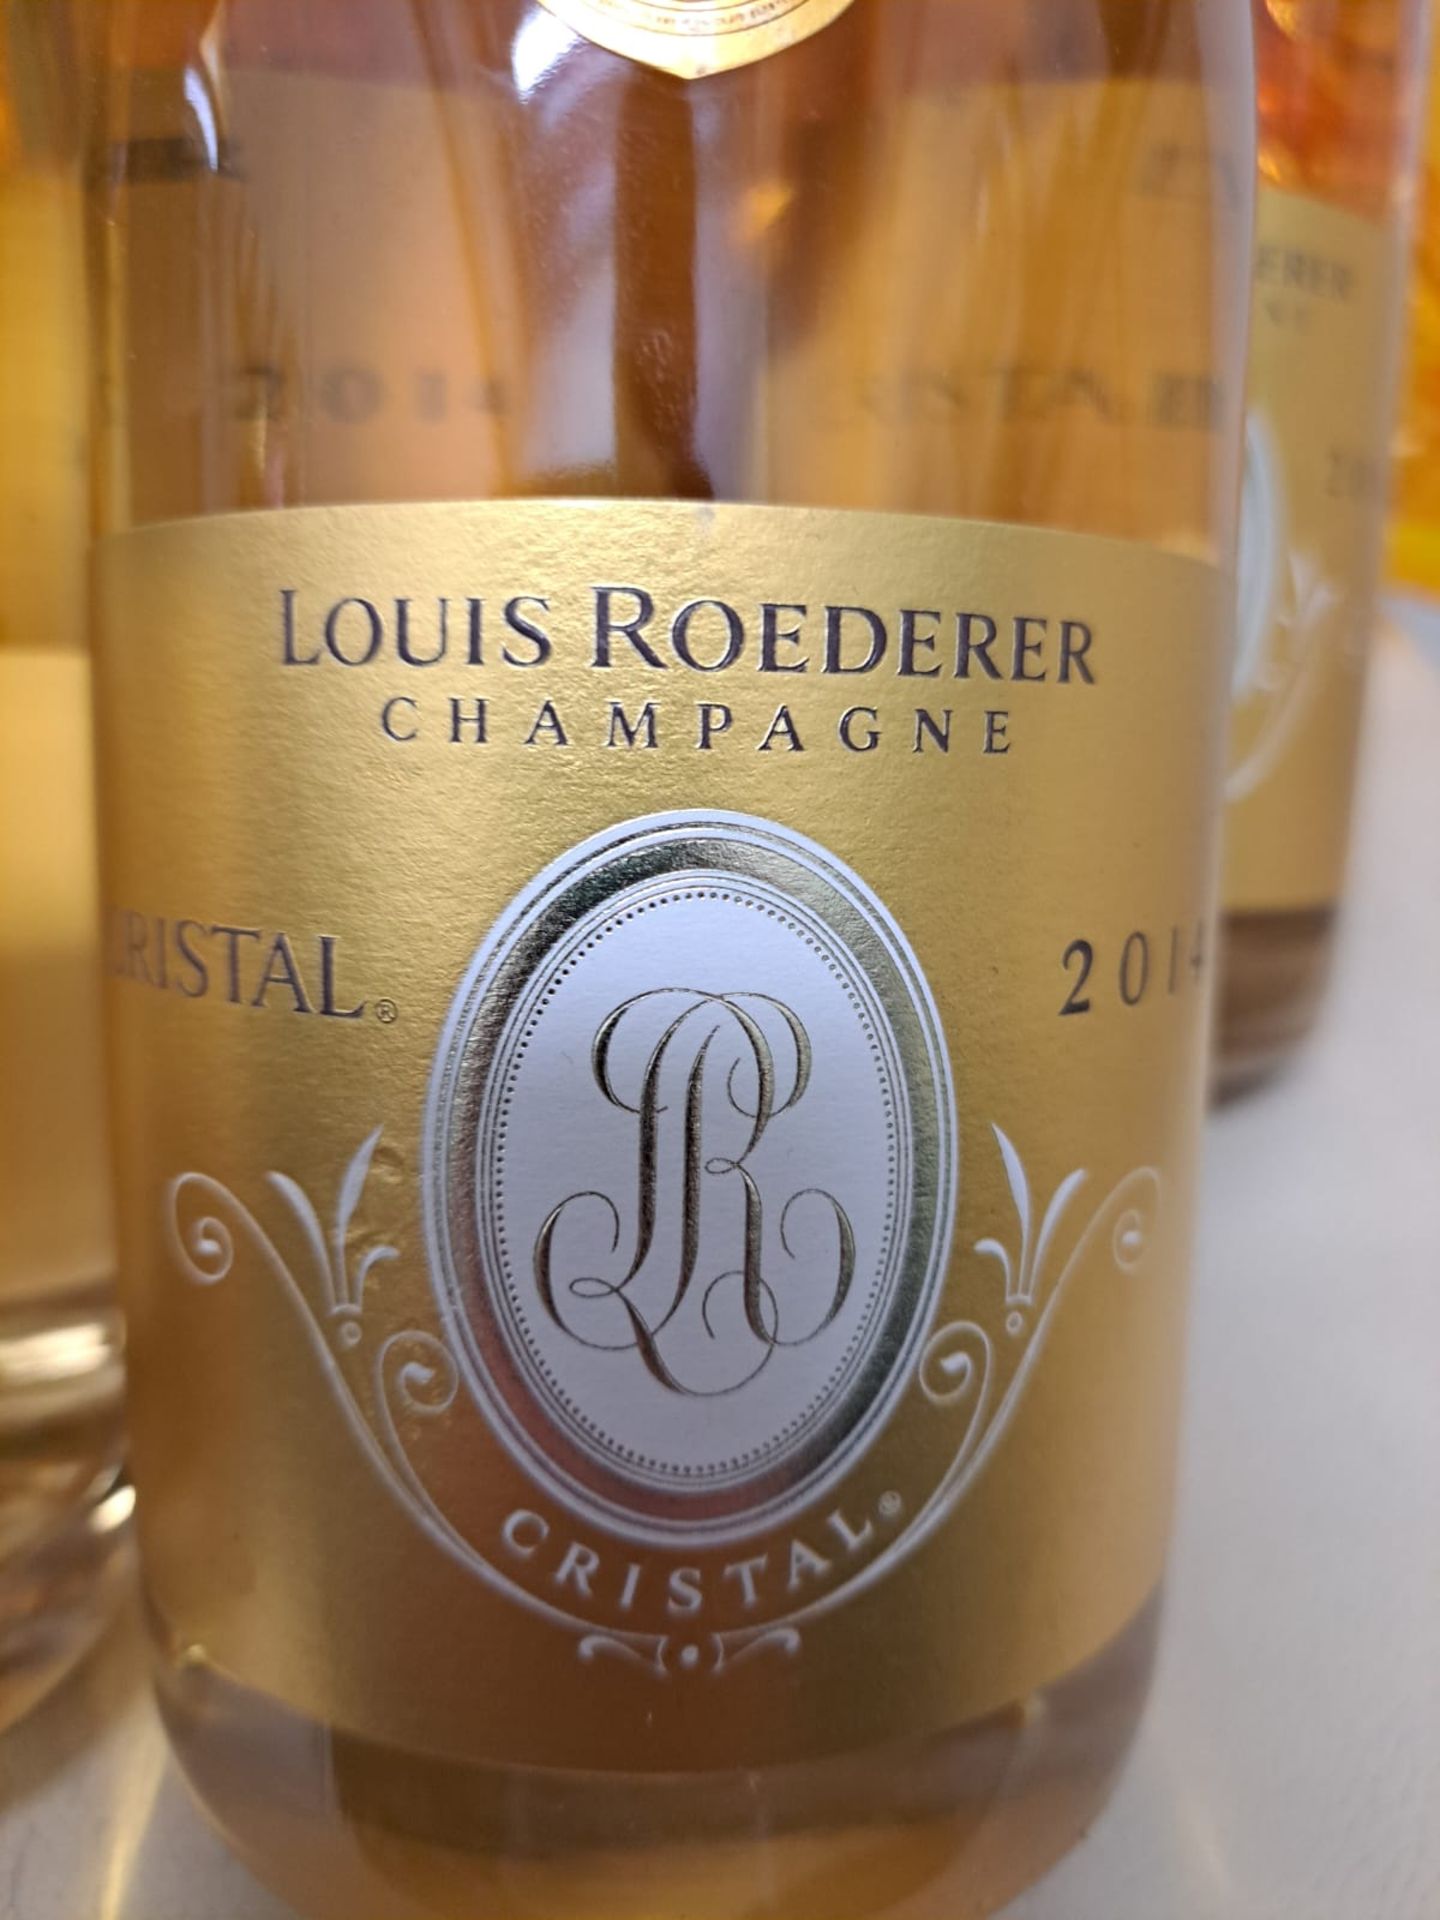 3 x Bottles of 2014 Louis Roederer Cristal Millesime Brut Champagne - Retail Price £810 - Ref: - Image 2 of 2